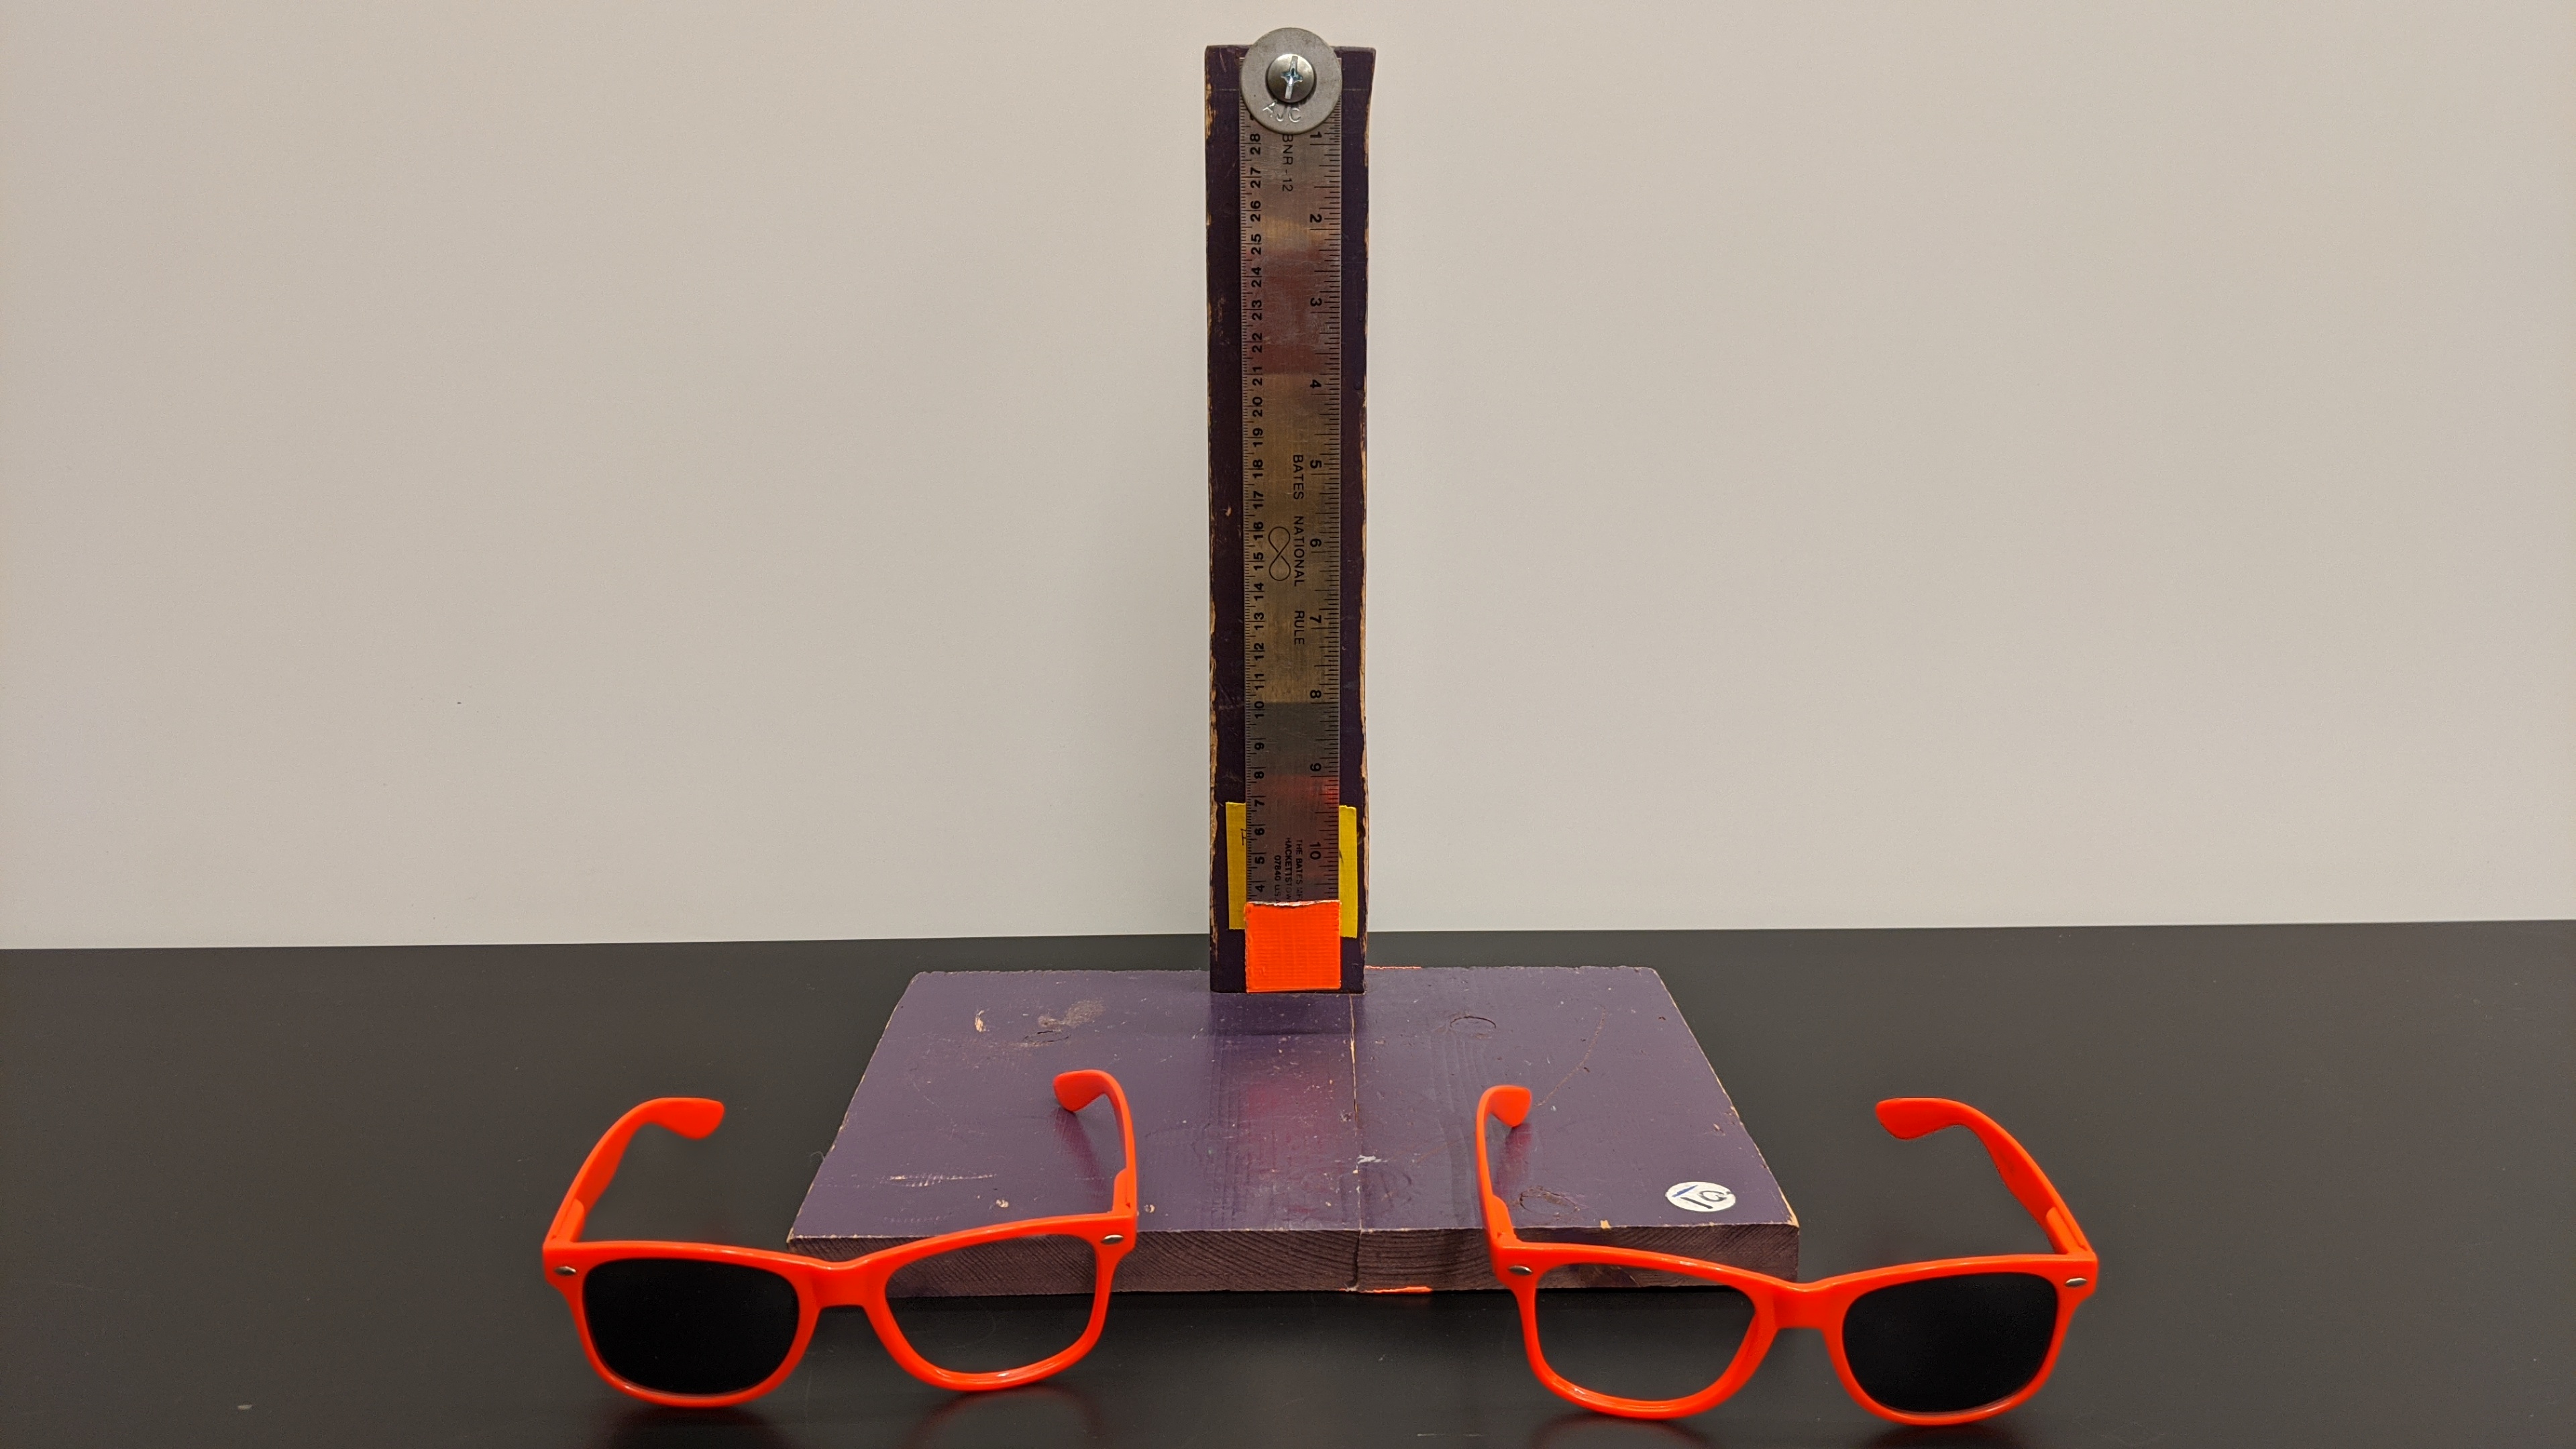 A pendulum and some sunglasses with one lens popped out